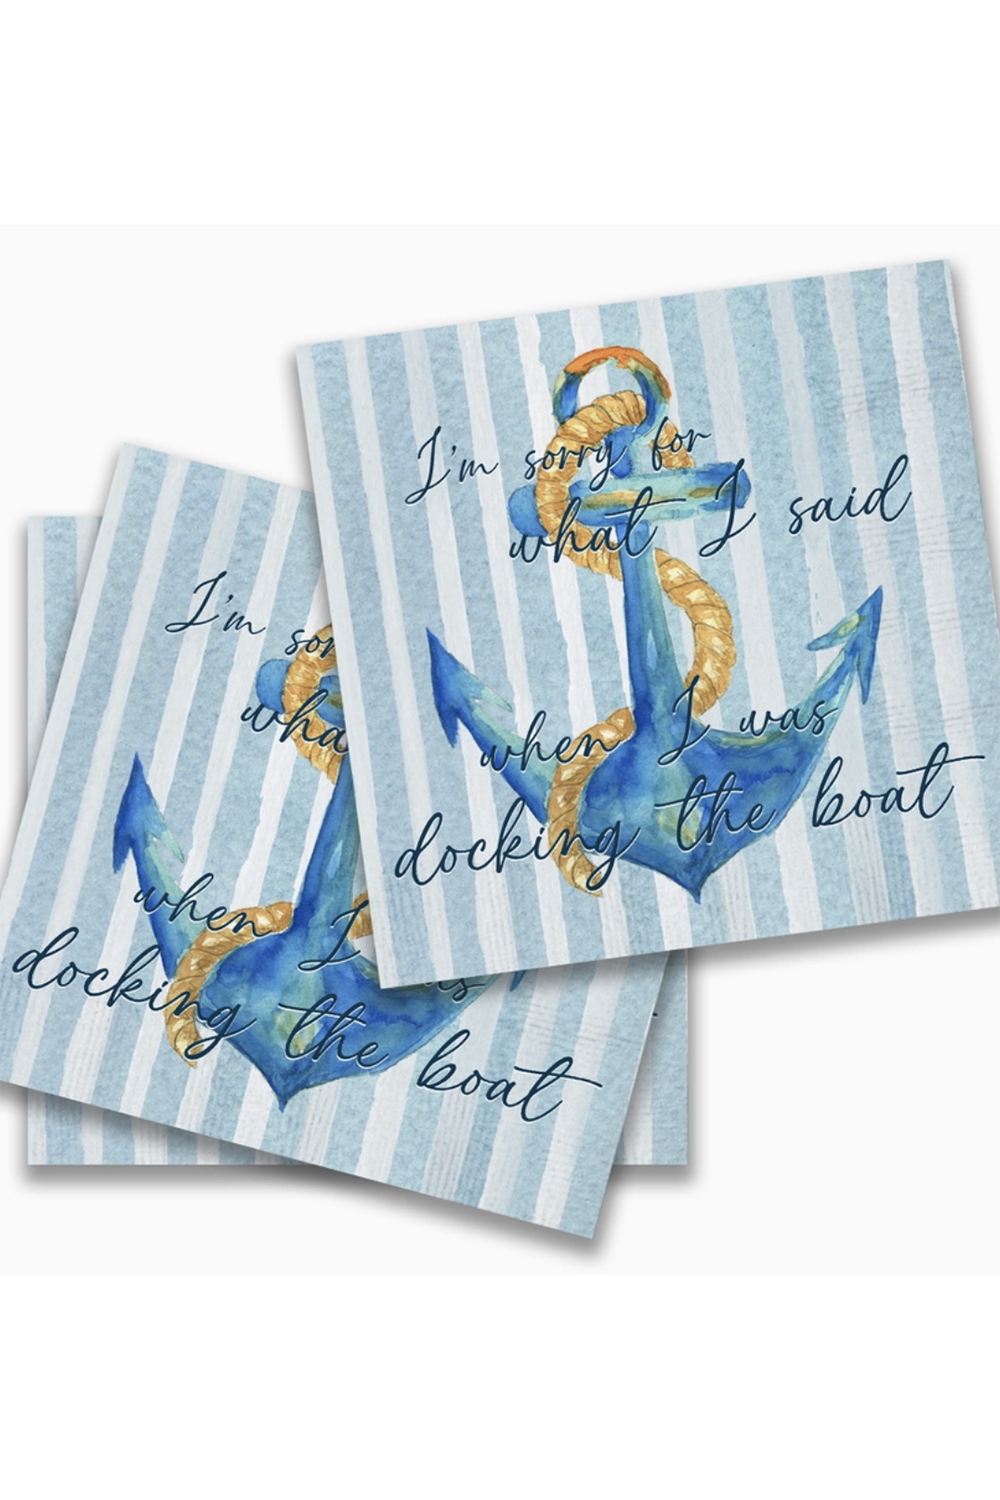 Cocktail Napkin Pack - Docking the Boat Anchor